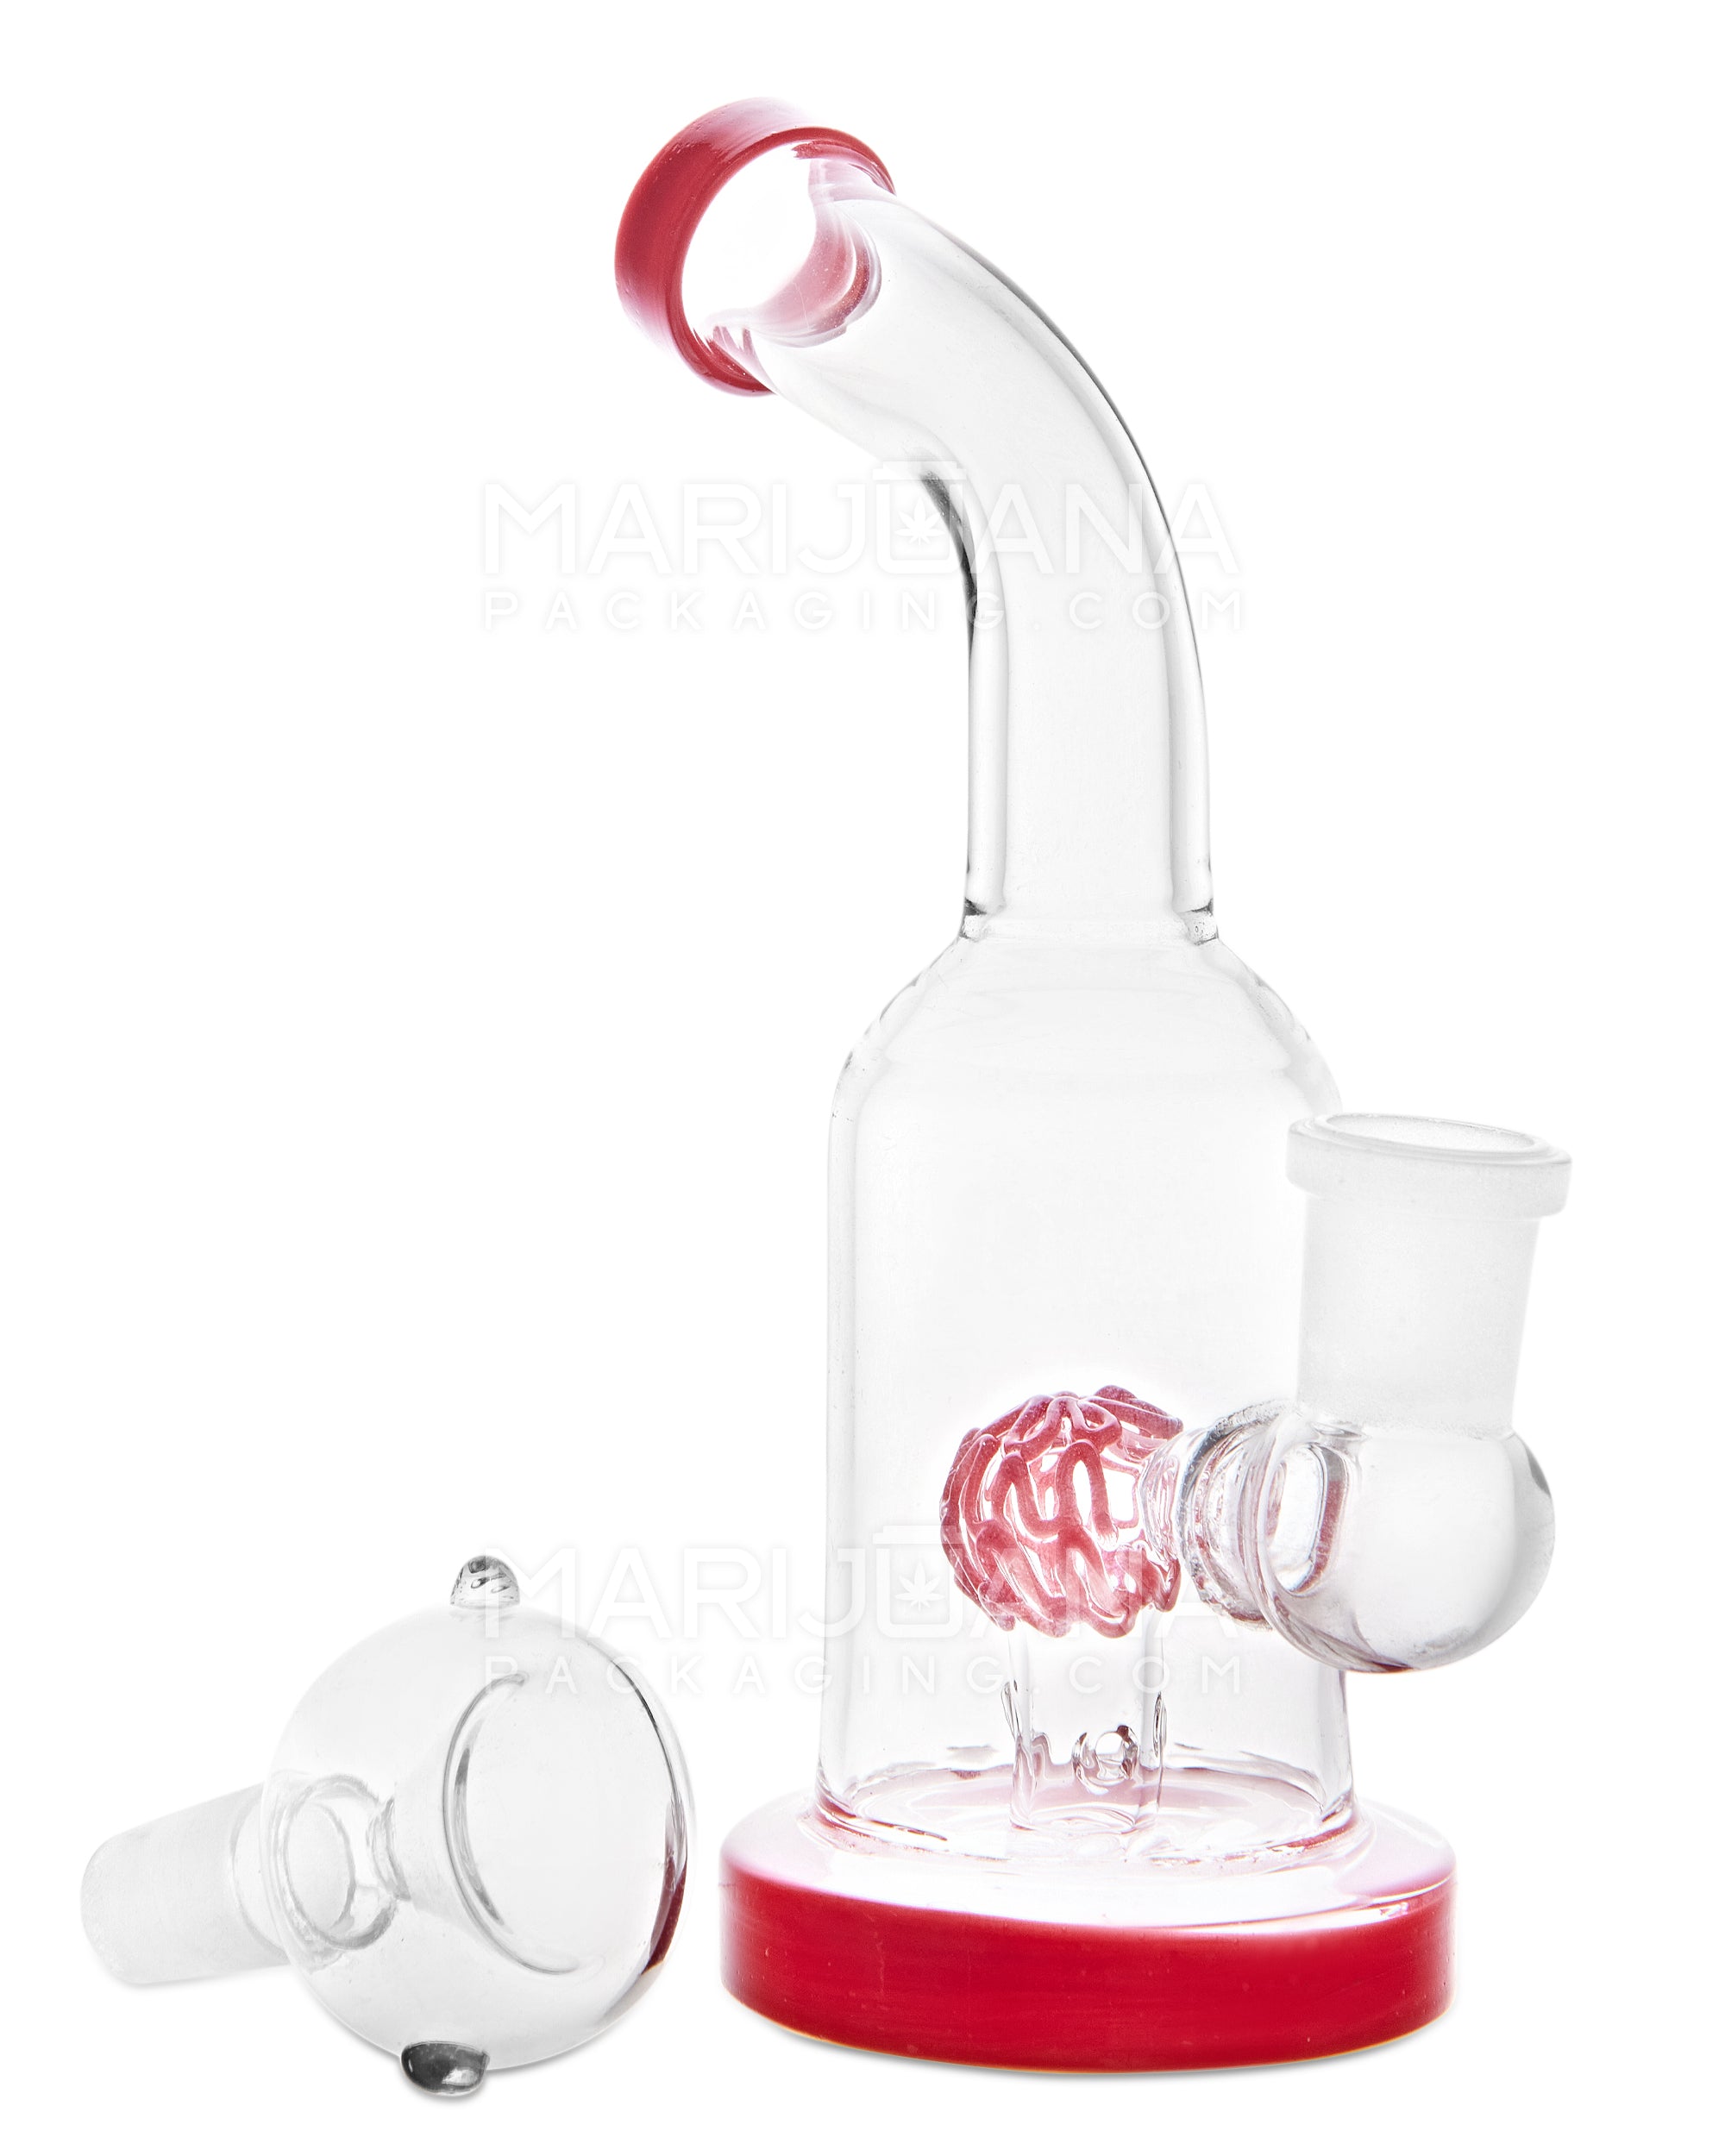 Bent Neck Swirl Orb Perc Glass Water Pipe w/ Thick Base | 6in Tall - 14mm Bowl - Red - 2